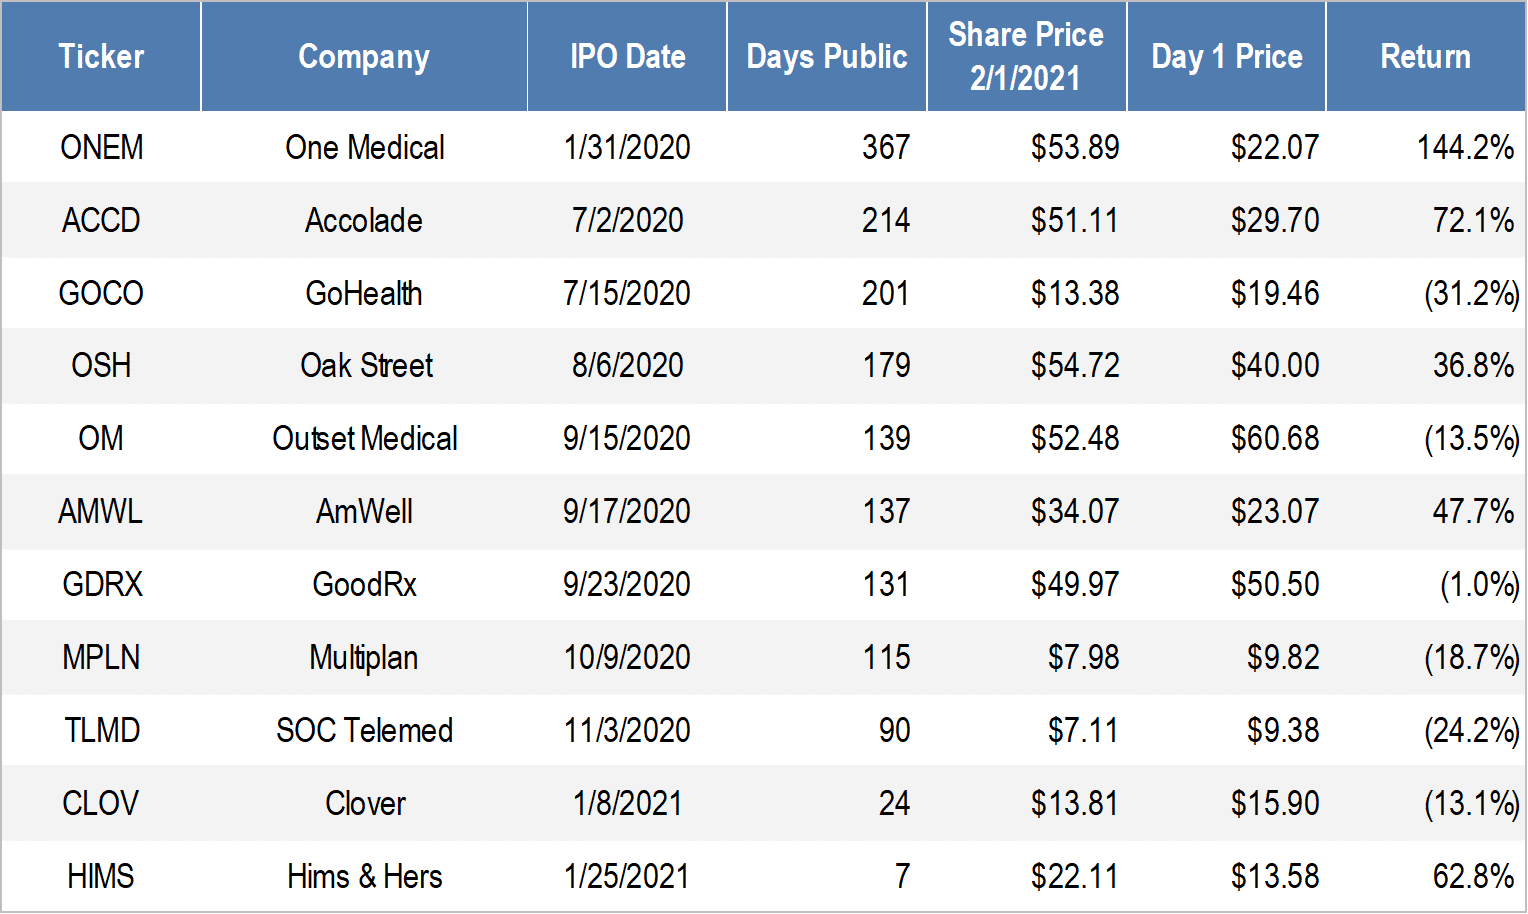 The 12 Digital Health Companies that IPO'd in 2020.